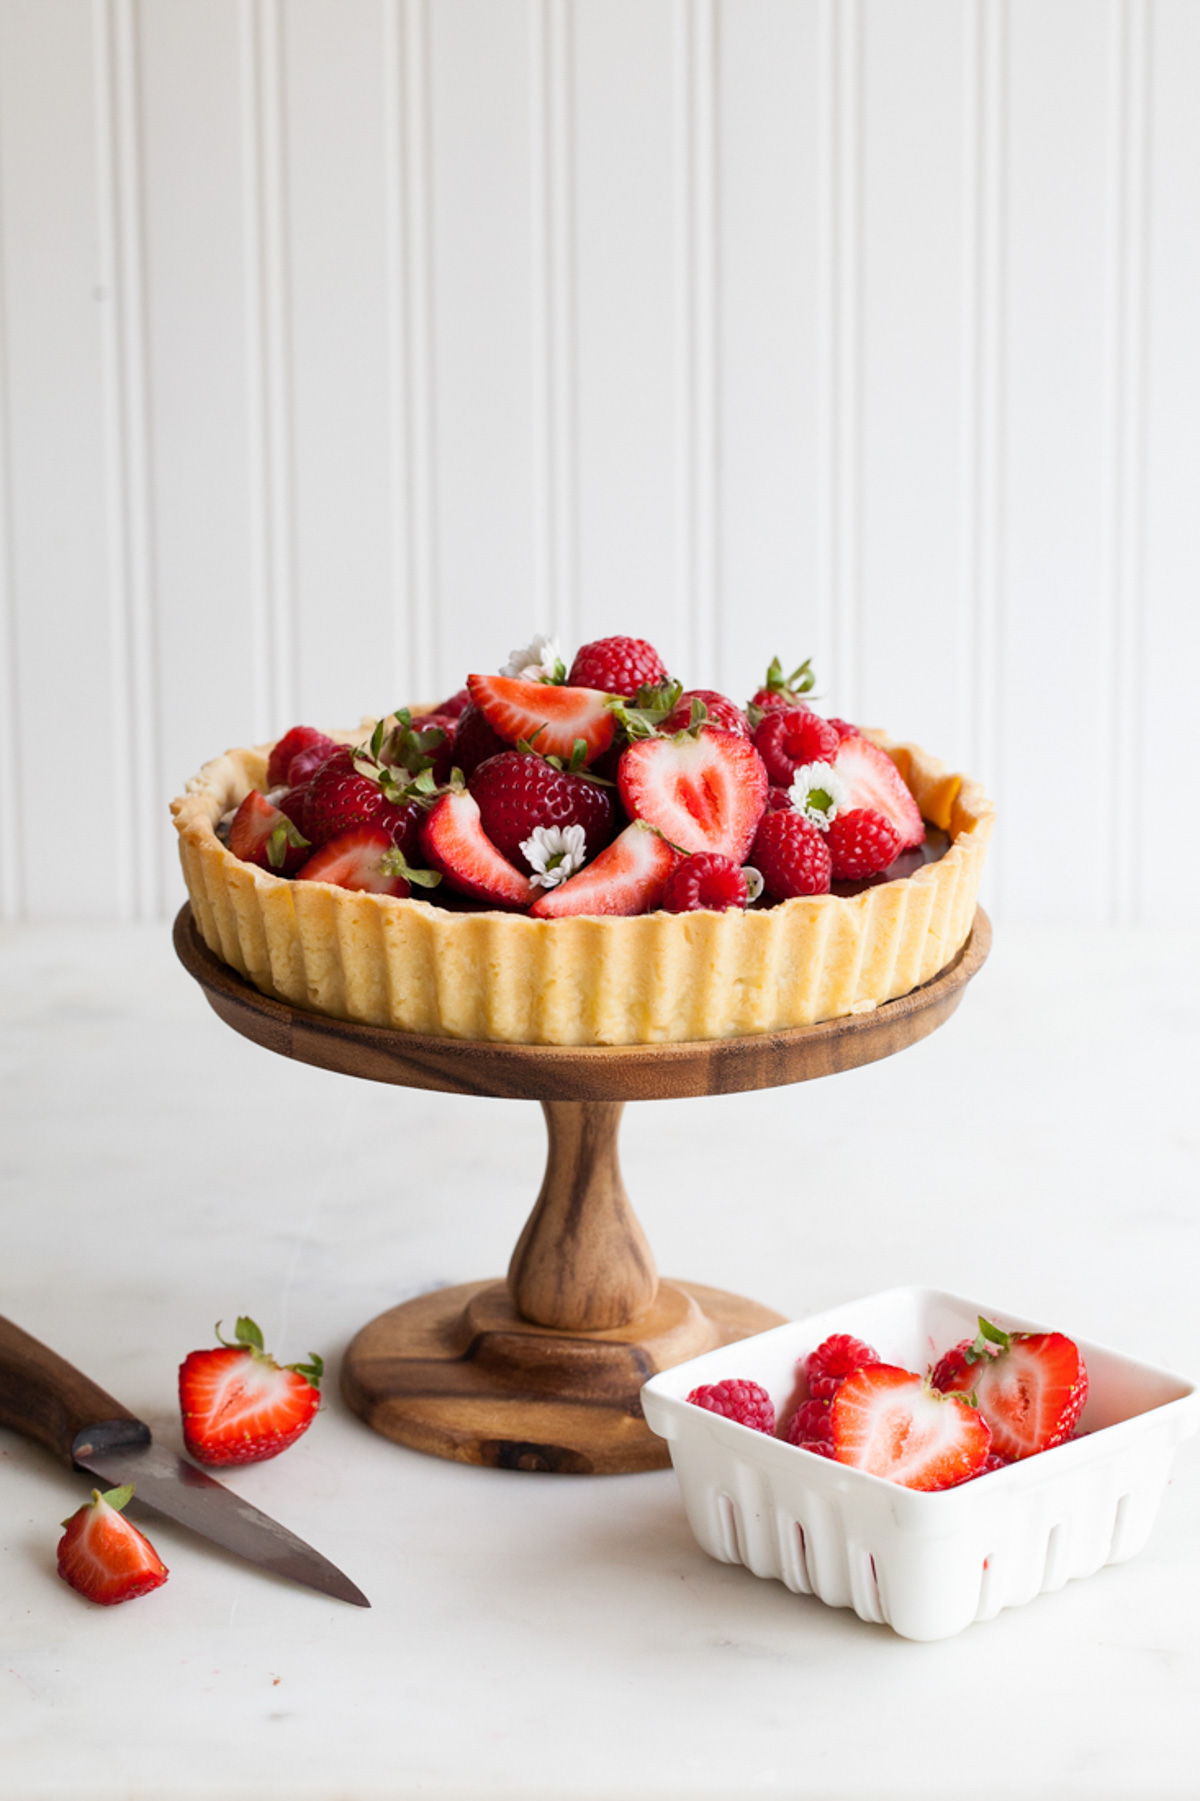 A chocolate ganache tart piled high with fresh berries on a cake stand